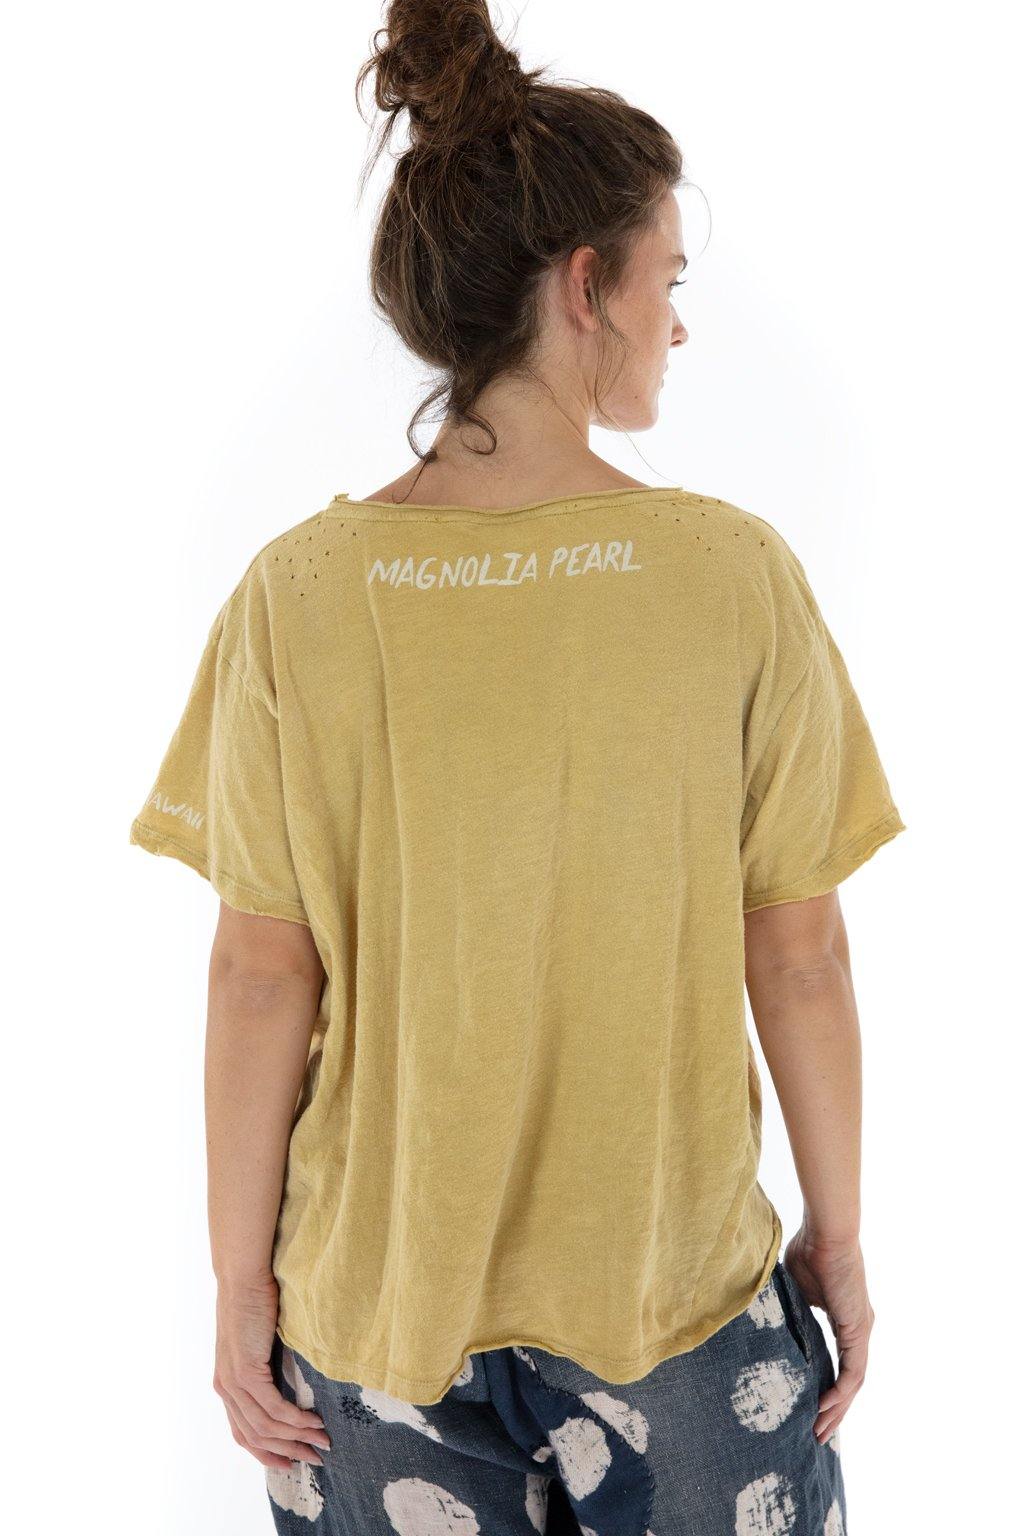 Hang Loose T by Magnolia Pearl